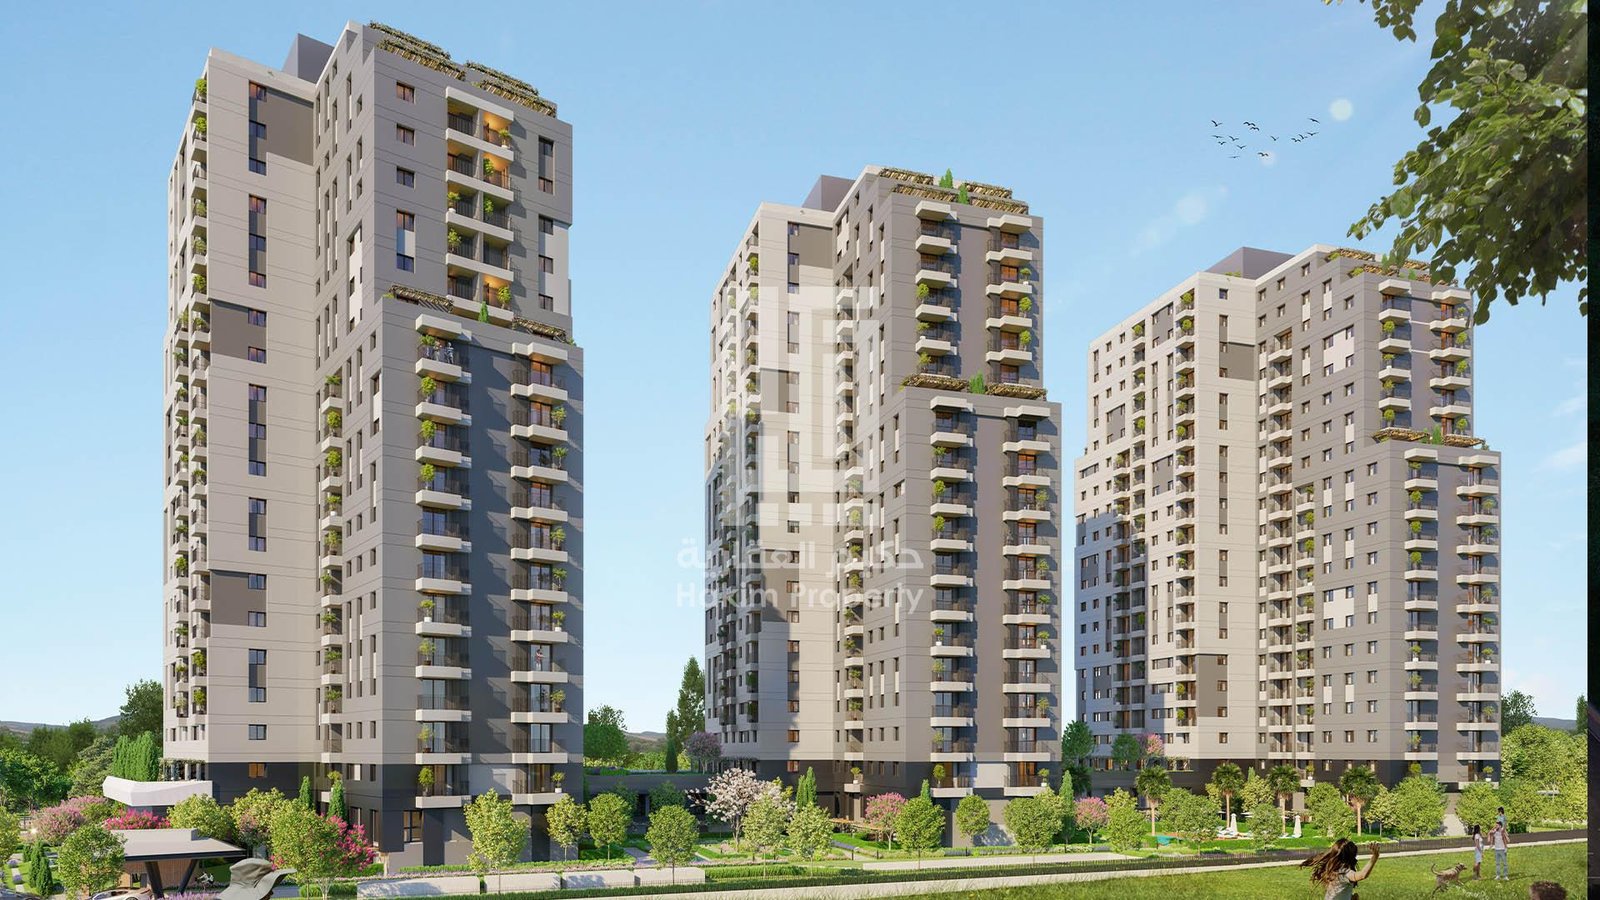 Investment towers in Basin Express